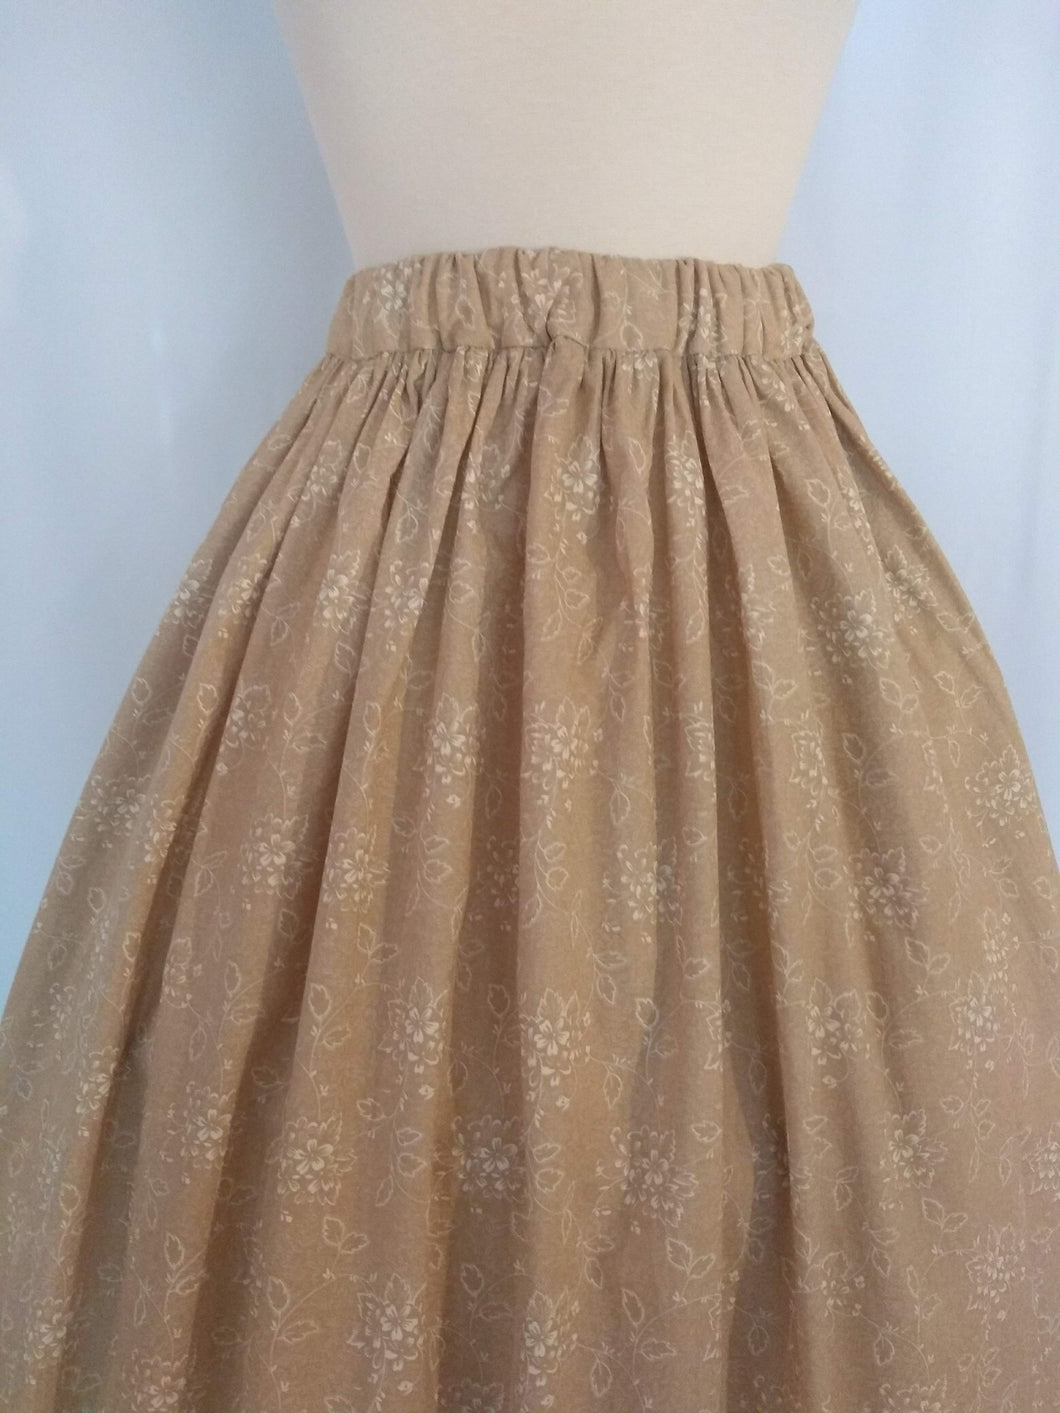 Tan and White Floral Cotton Skirt